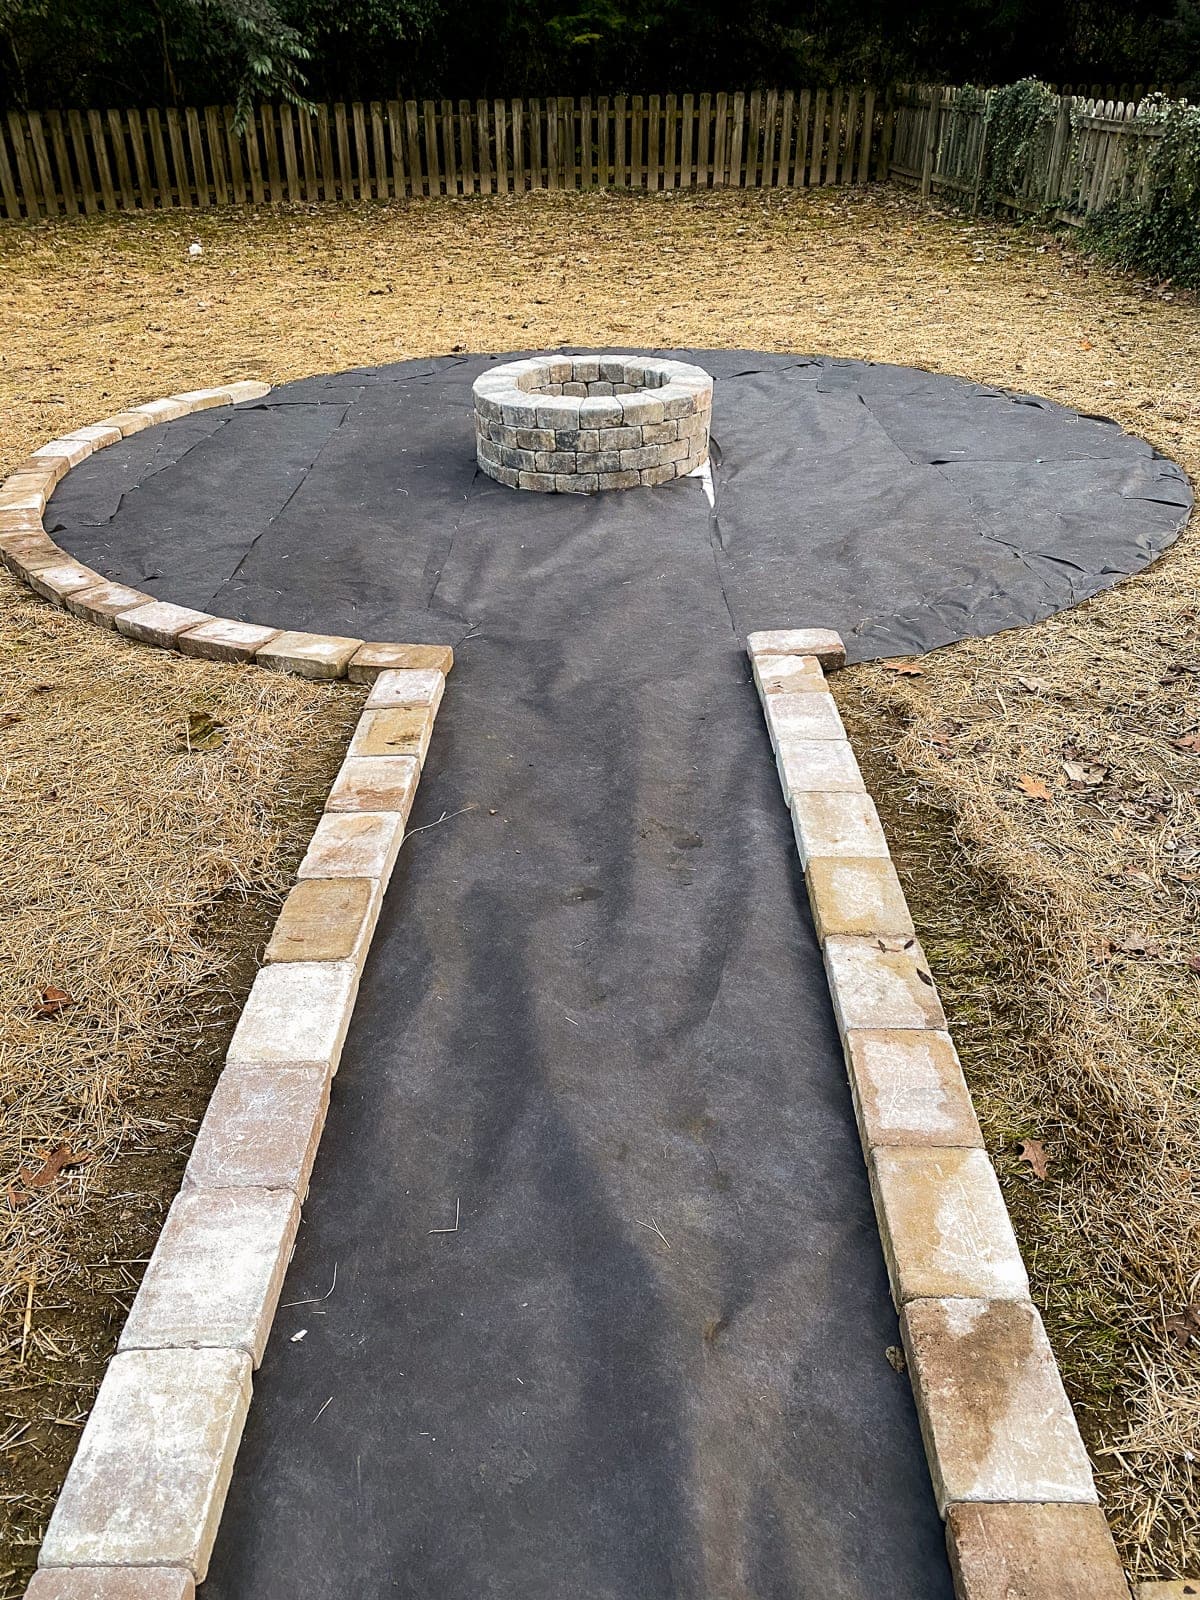 landscape fabric around a fire pit edged with stones